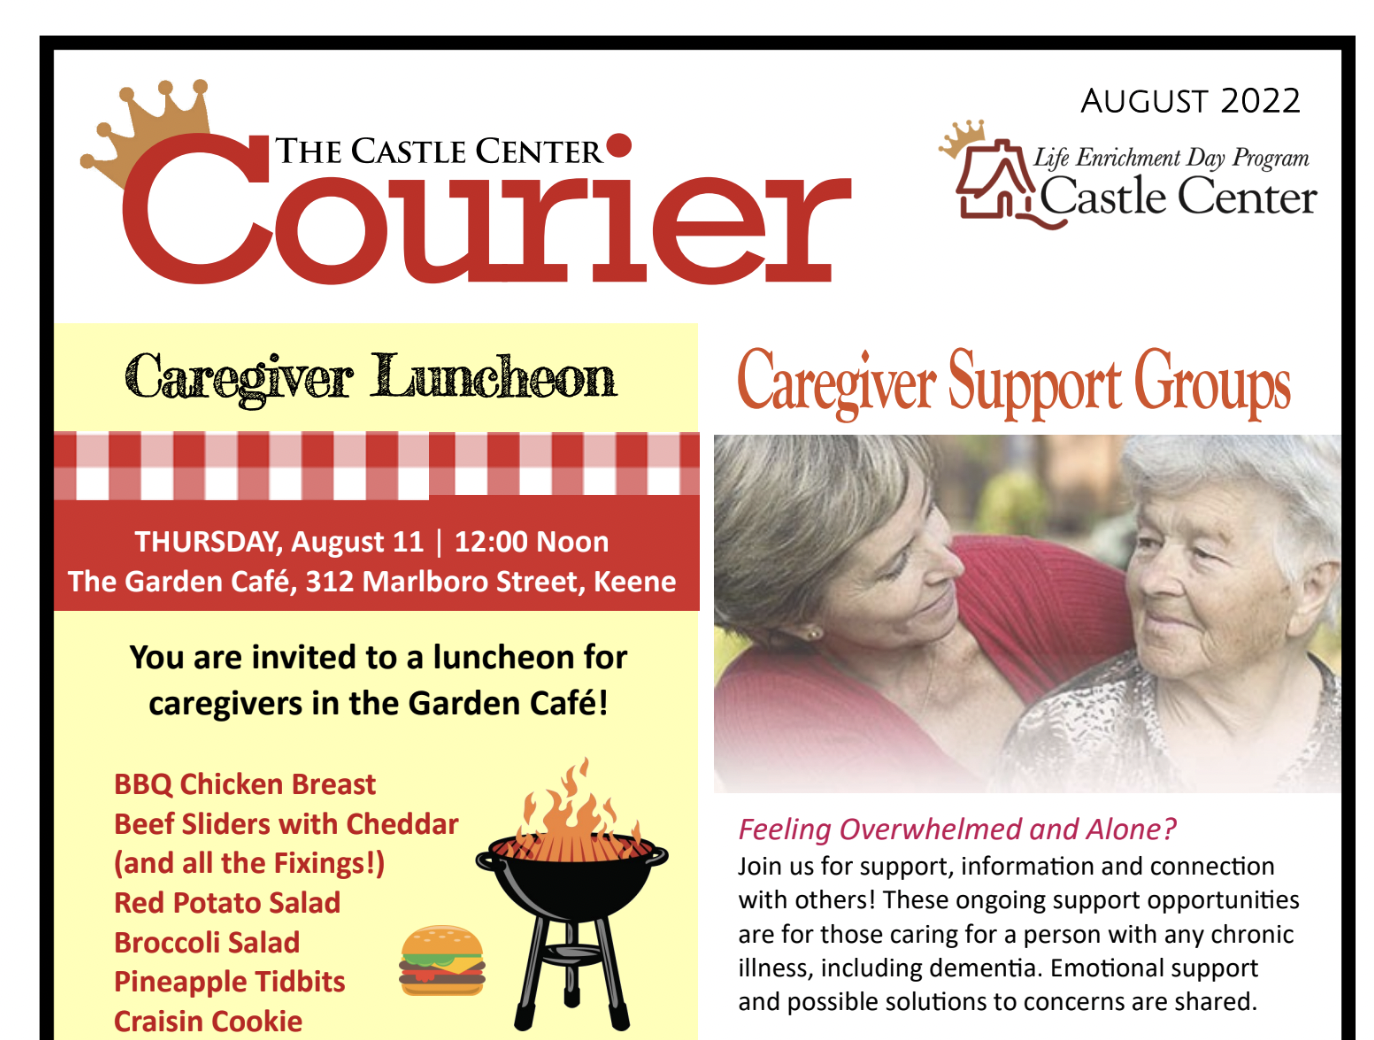 Part of the front page for the August 2022 Castle Center Newsletter